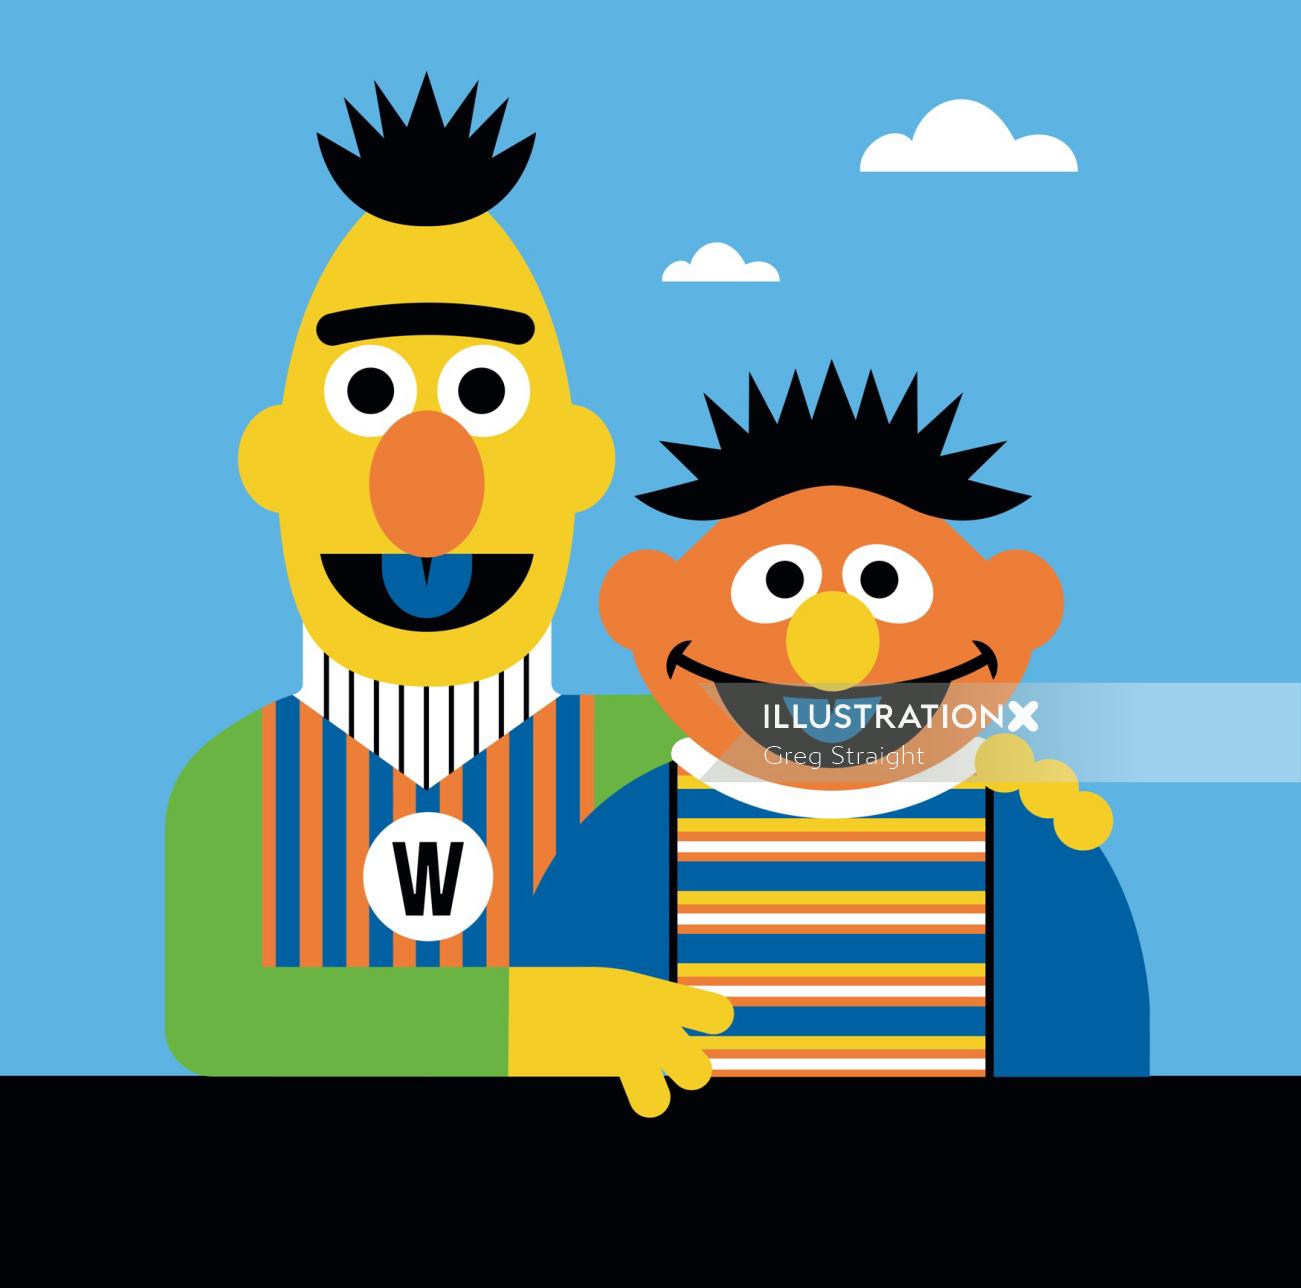 Animation illustration of Muppets Bert and Ernie 